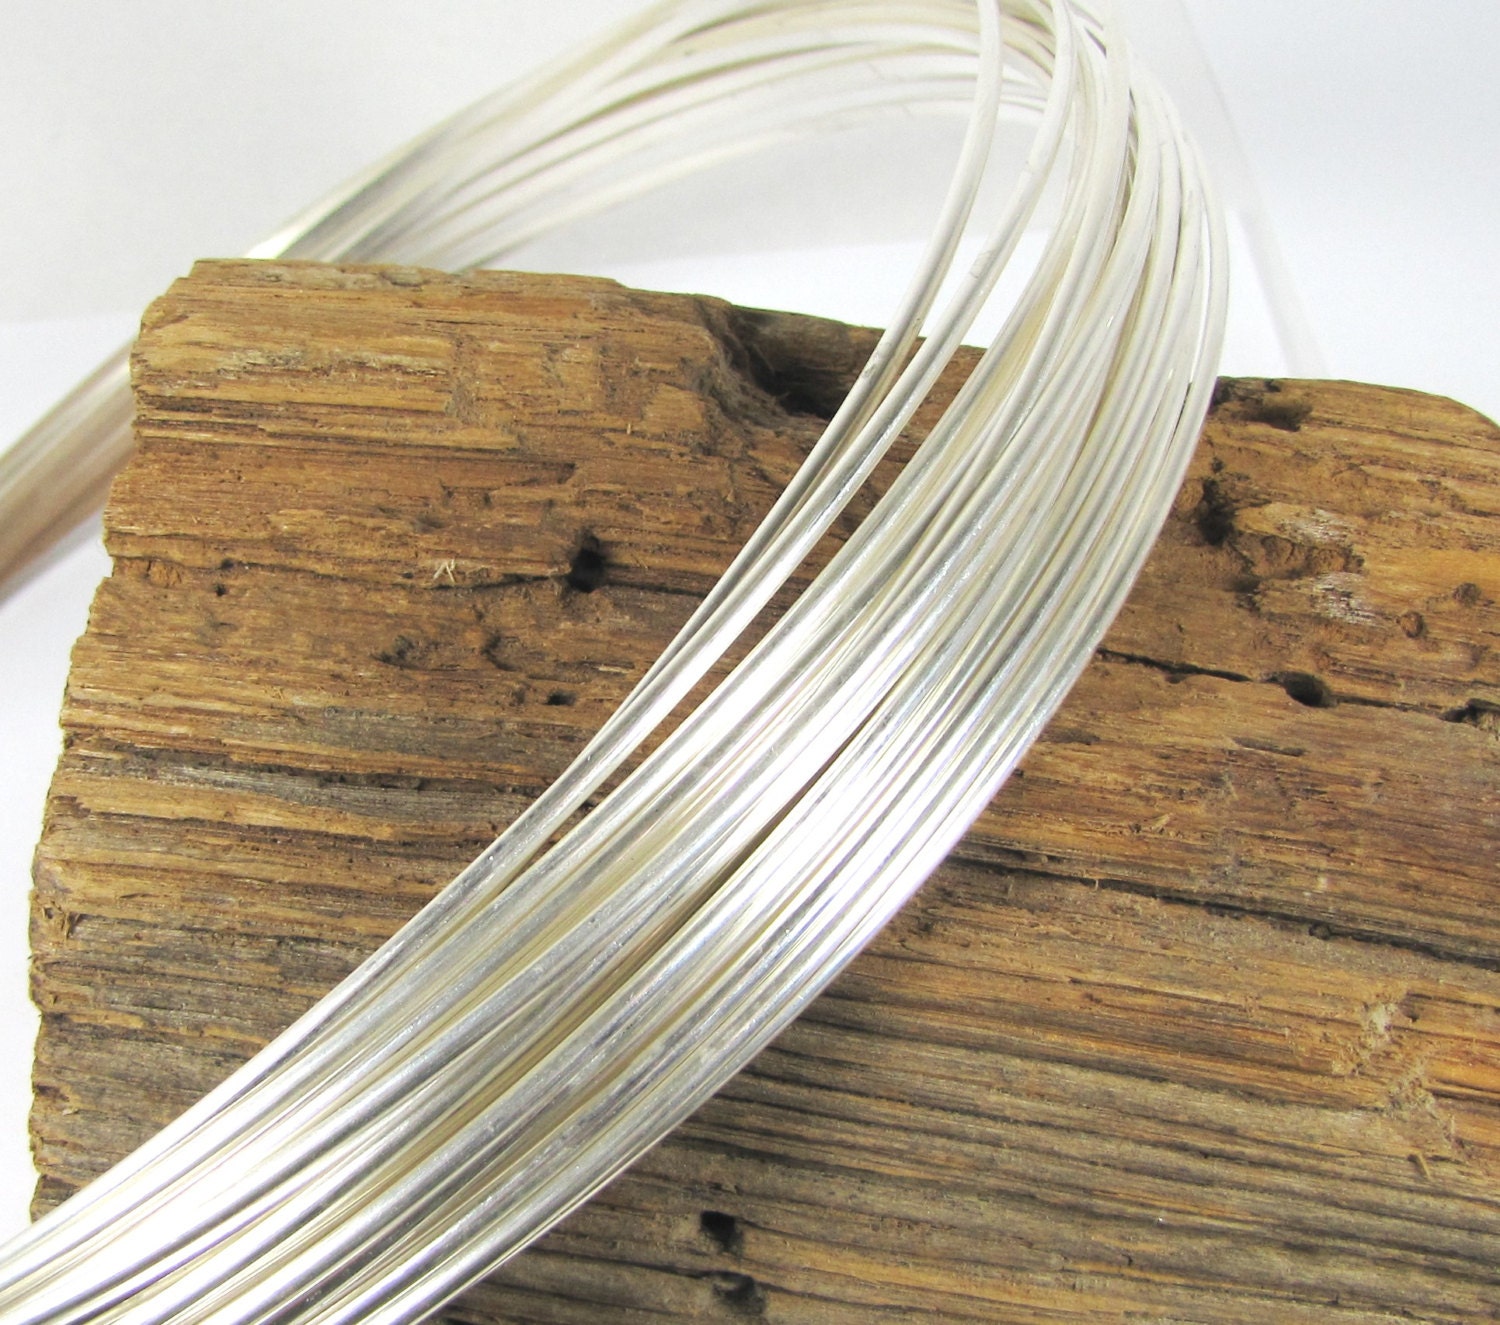 Twisted Wire 20 Gauge, Sterling Silver Wire, 1 Ft Length, Jewelry Wire, Rings  Wire, Bangle Wire, Tribal Jewelry Making, Twisted Wire Jewelry 